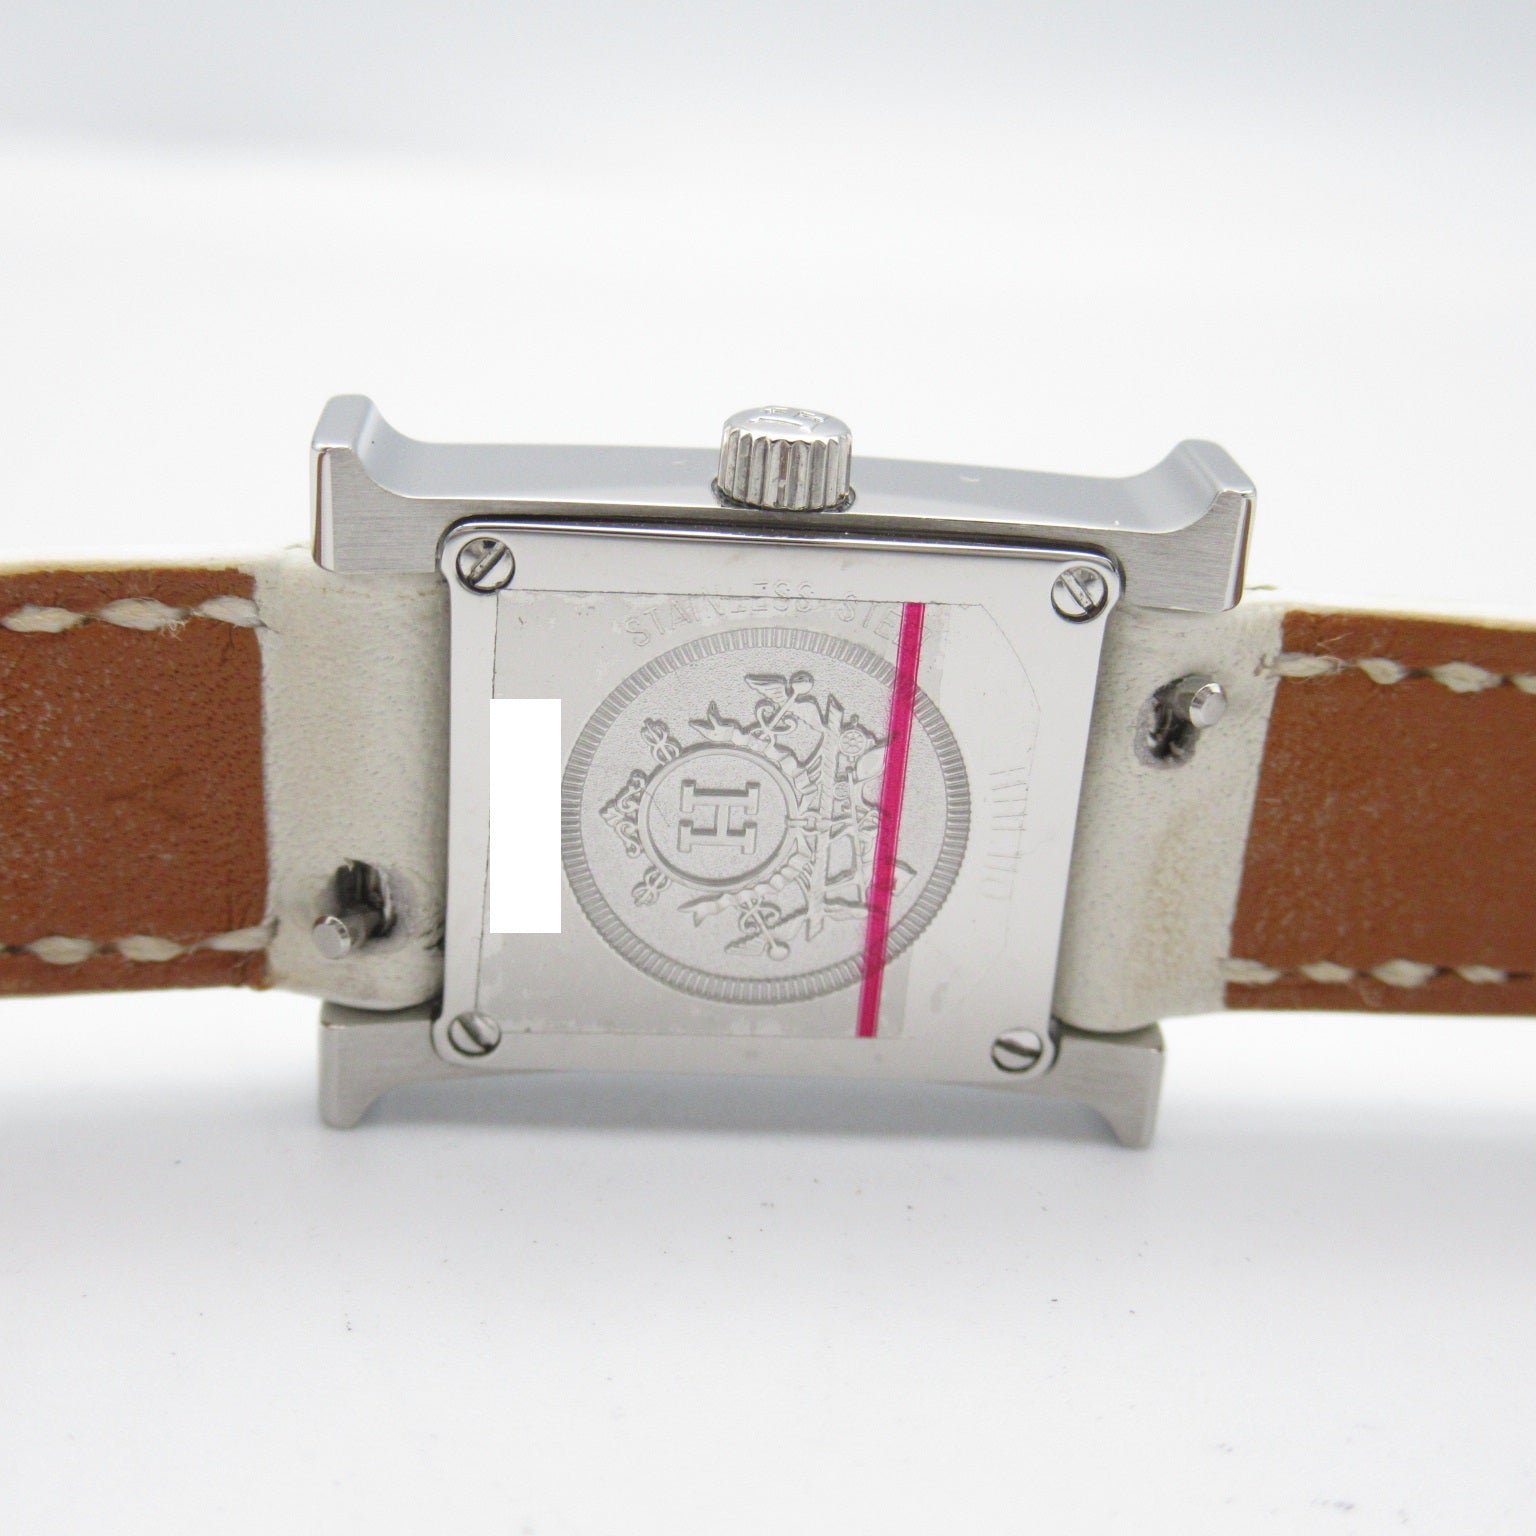 Hermes Hermes H Watch Mini 11P Diamond  Watch Stainless Steel Leather Belt  White S HH1.110